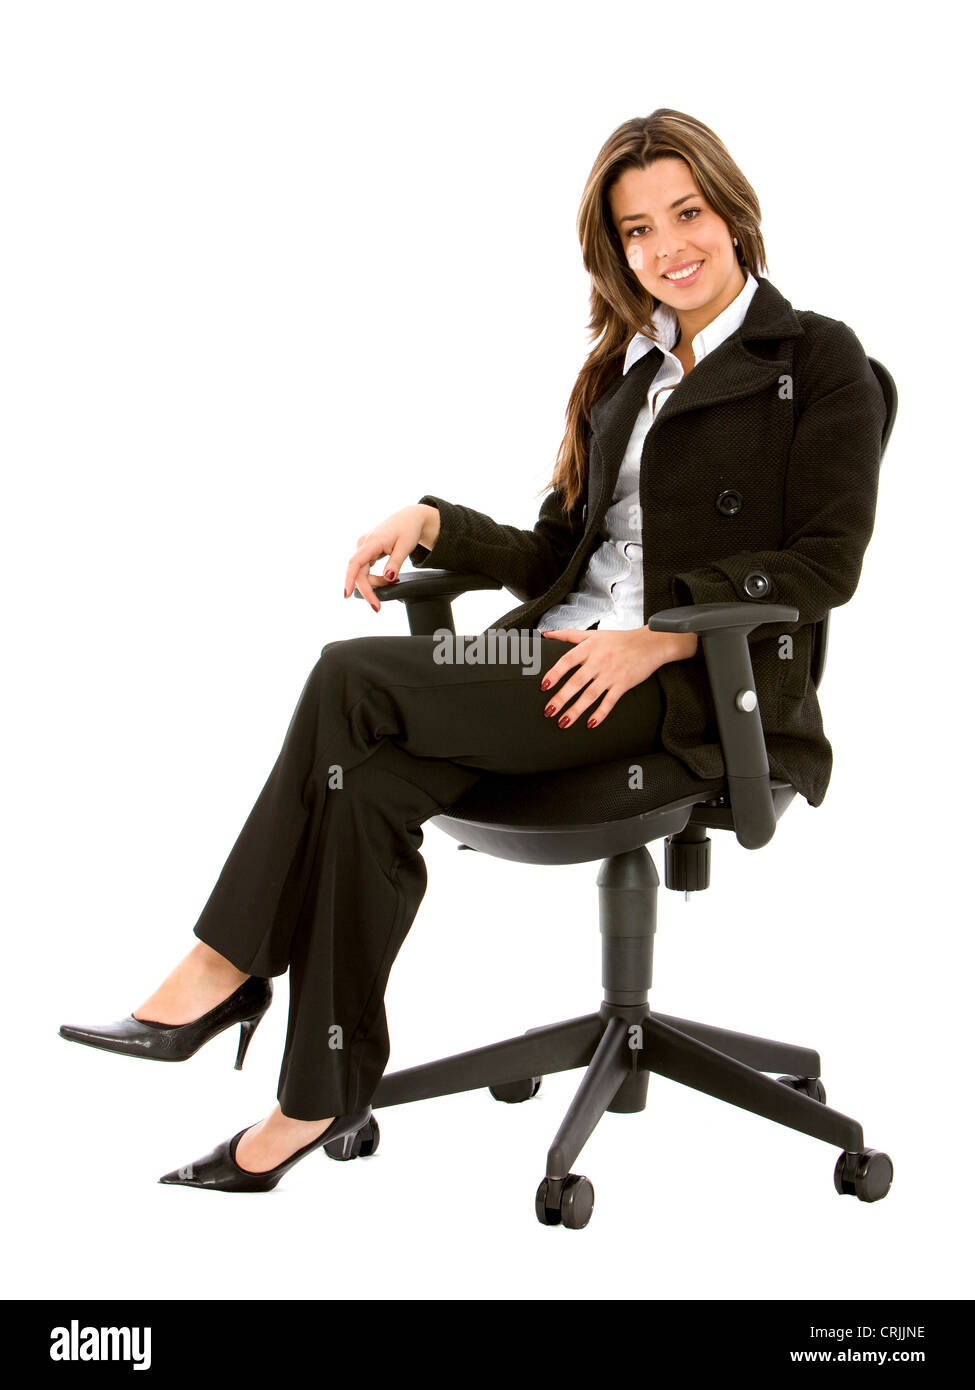 Young Business Woman With Light Brown Hair Sitting On An Office